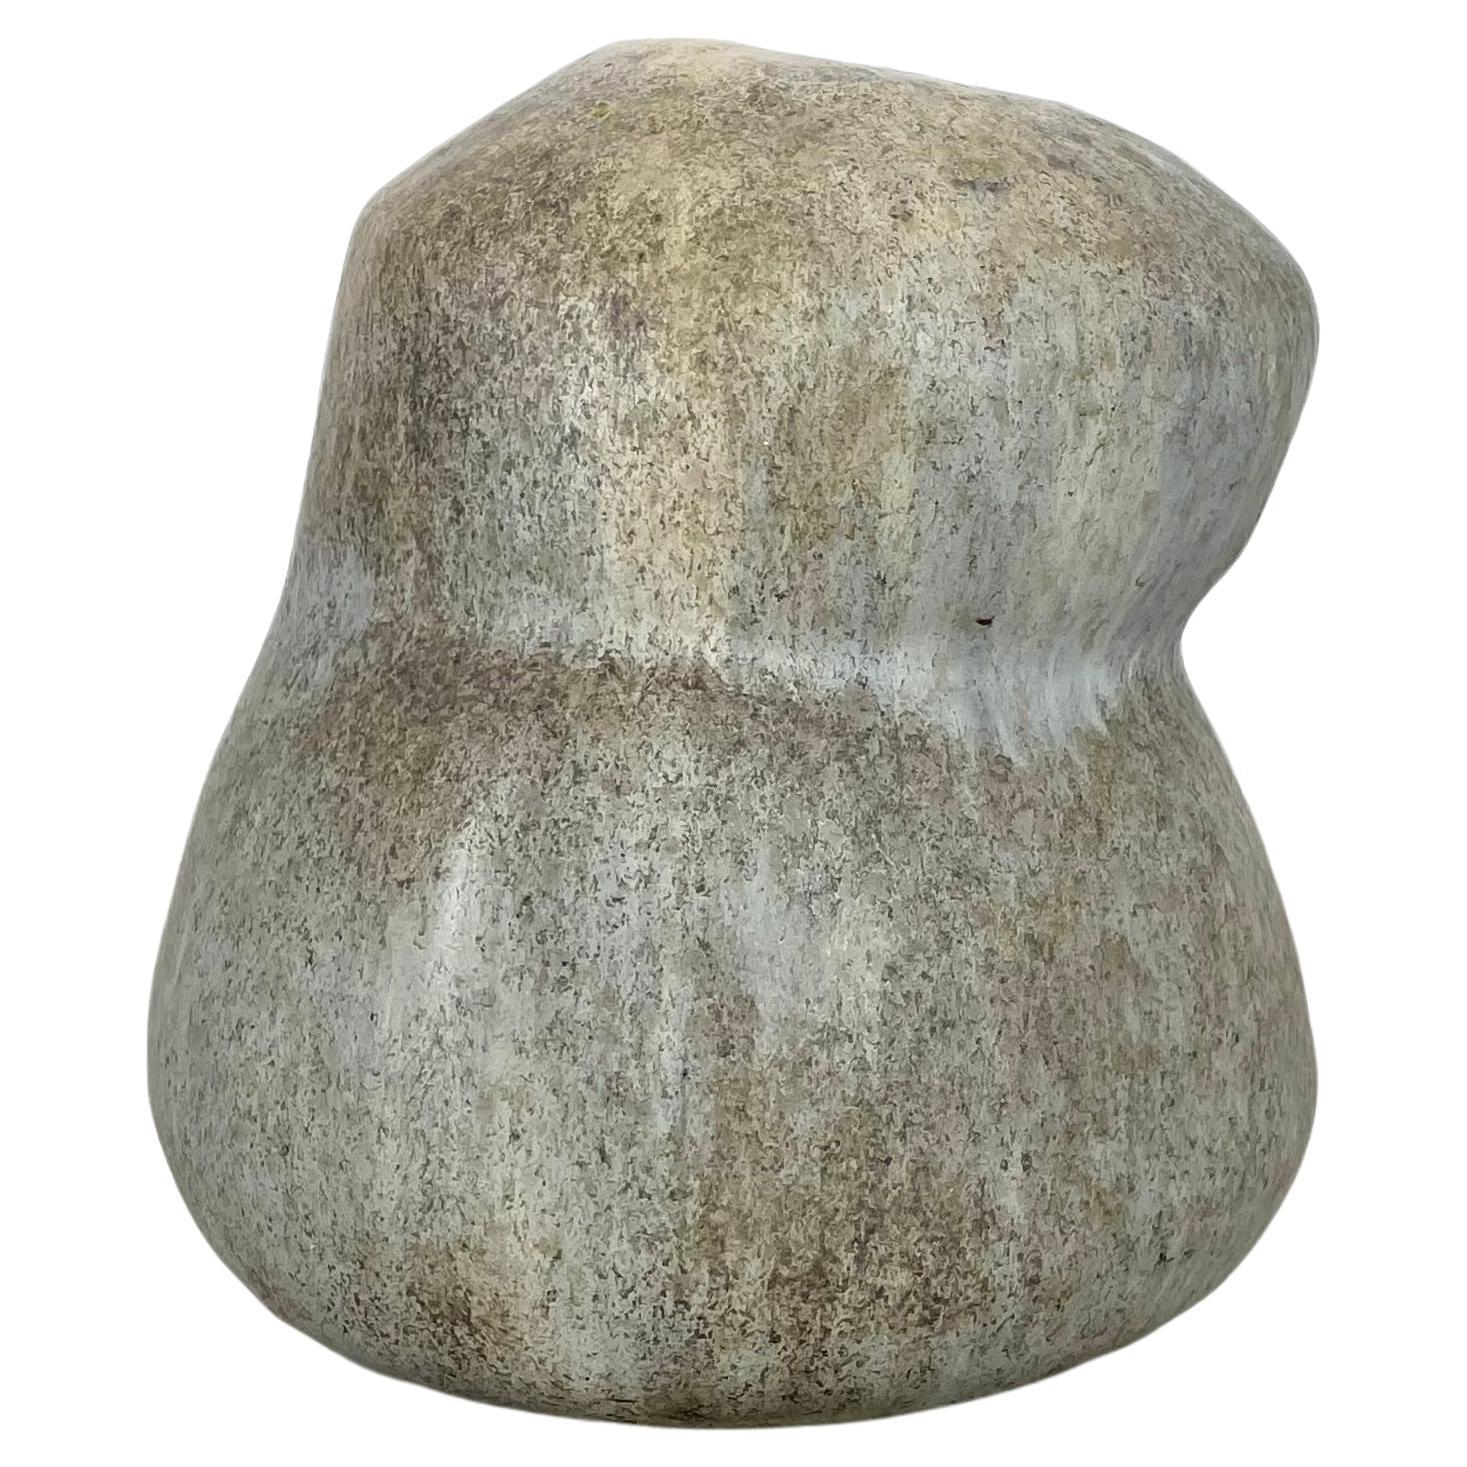 XL Sculptural Studio Pottery Vase Object, Otto Meier, Worpswede, Germany, 1960s For Sale